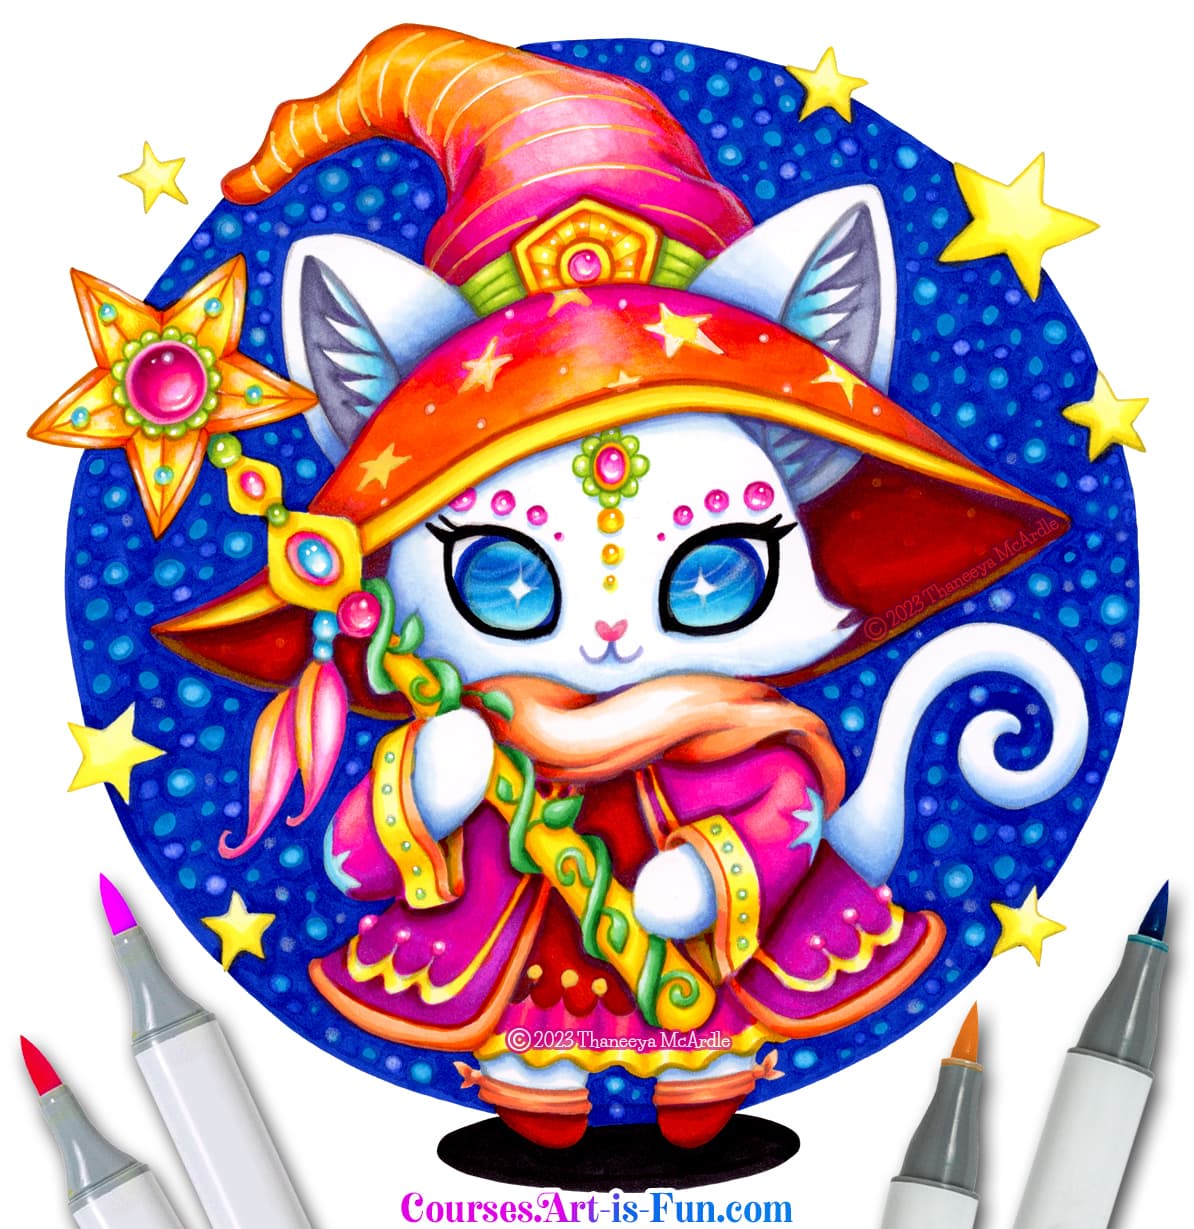 Wizard Cat Alcohol Markers Course: A Step-by-Step Video Course by Thaneeya McArdle